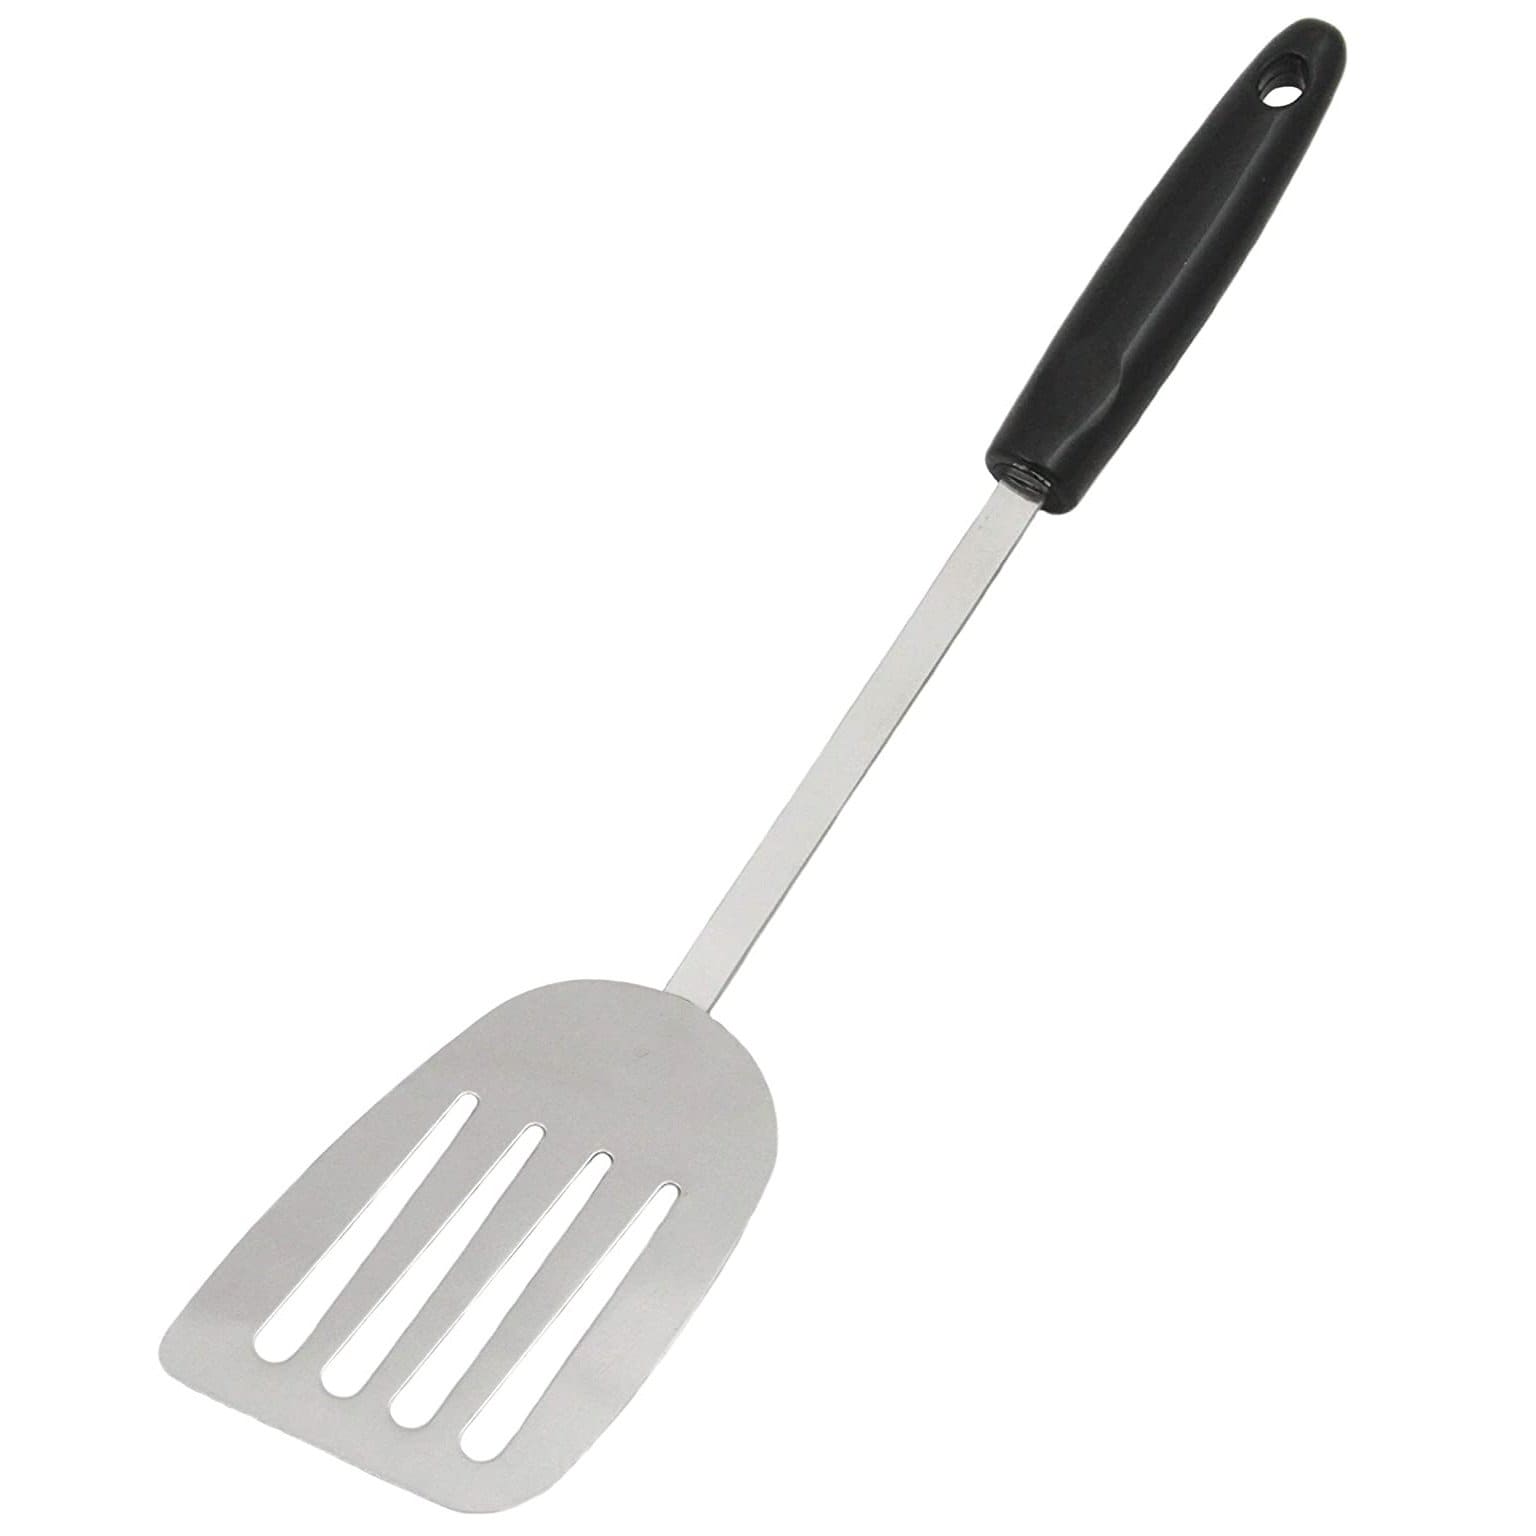 Tablecraft Black Silicone Slotted Spatula with Stainless Steel Handle - 14L